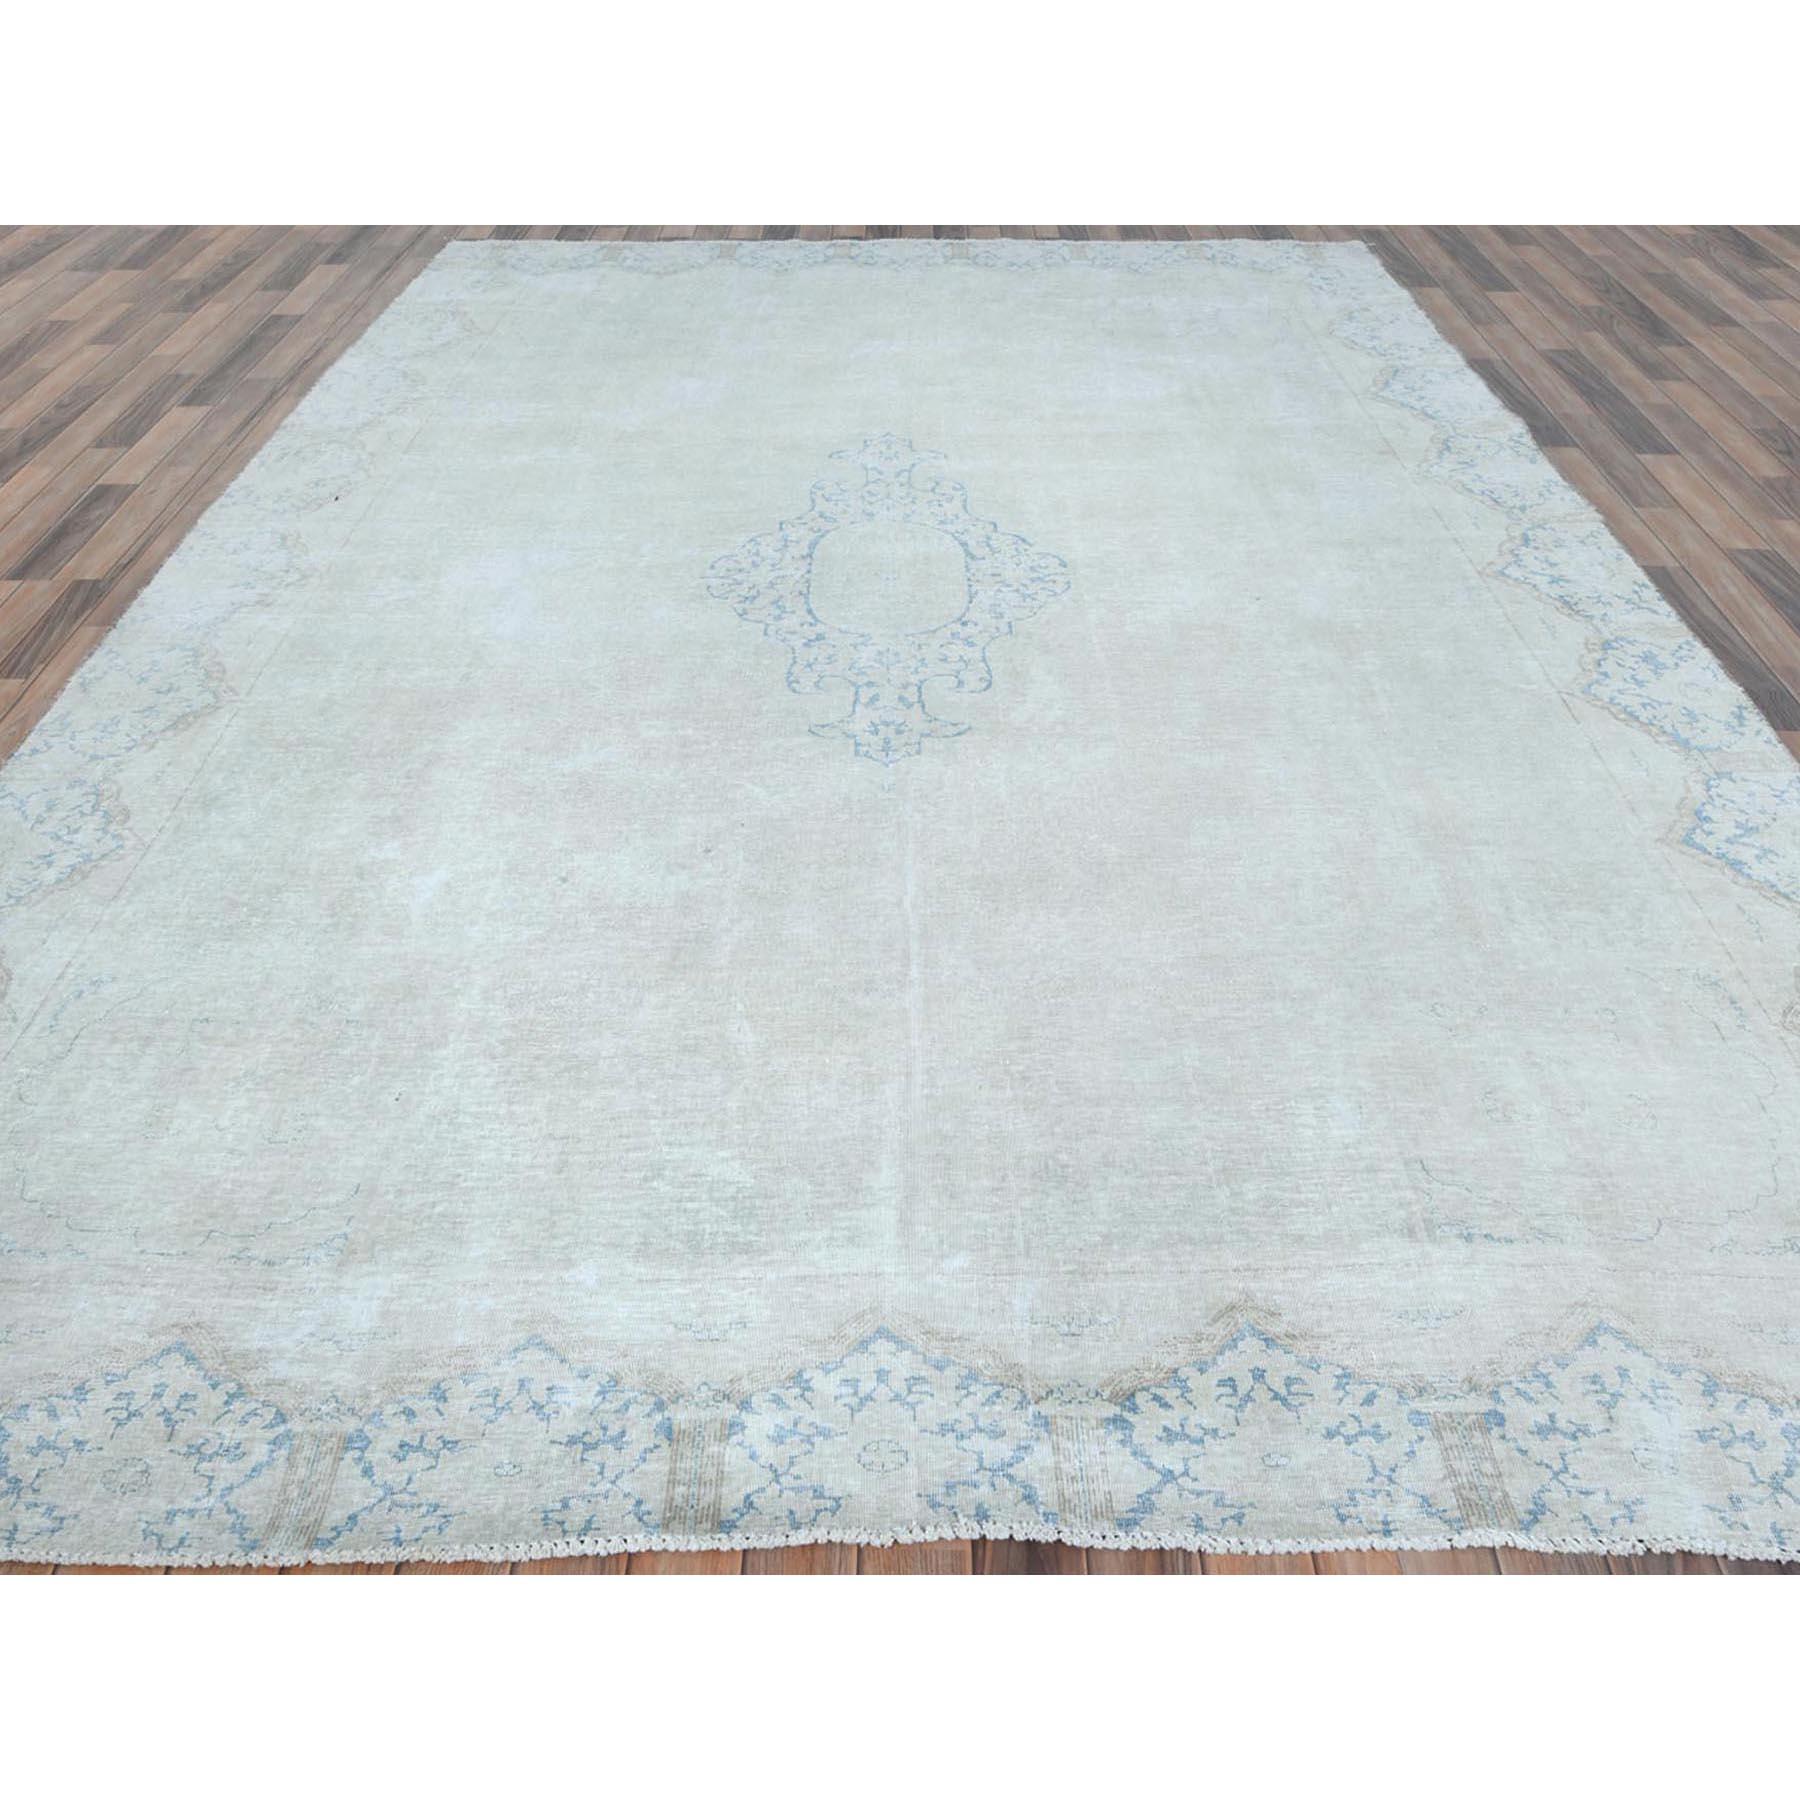 Medieval Ivory Worn Wool Cropped Thin Hand Knotted Distressed Look Old Persian Kerman Rug For Sale